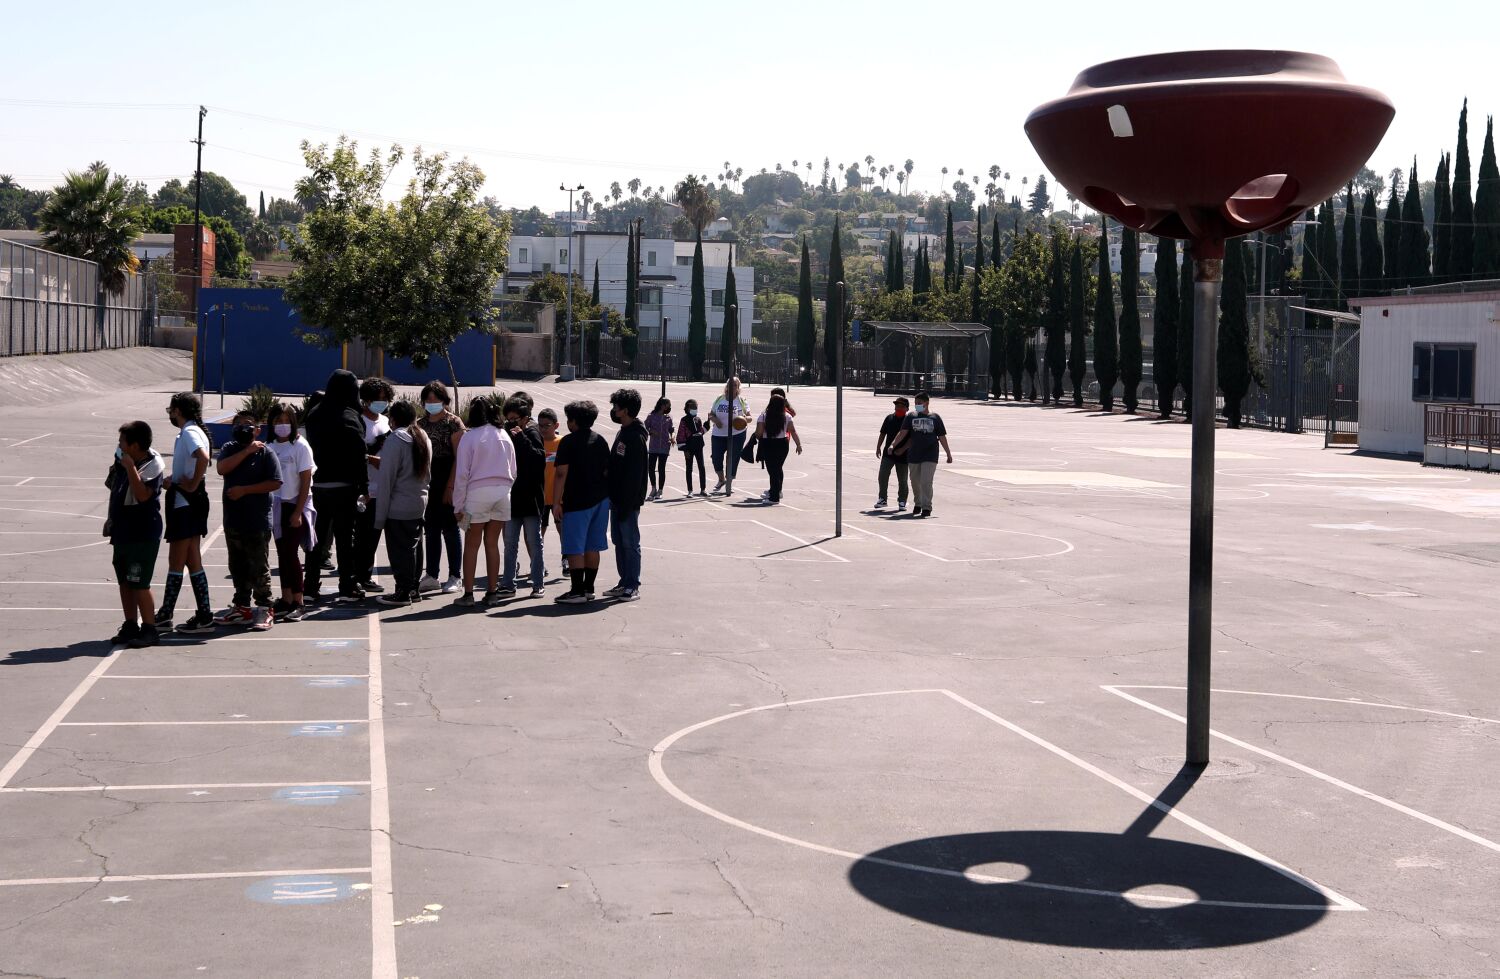 Op-Ed: California makes it too hard for schools to shield kids from extreme heat